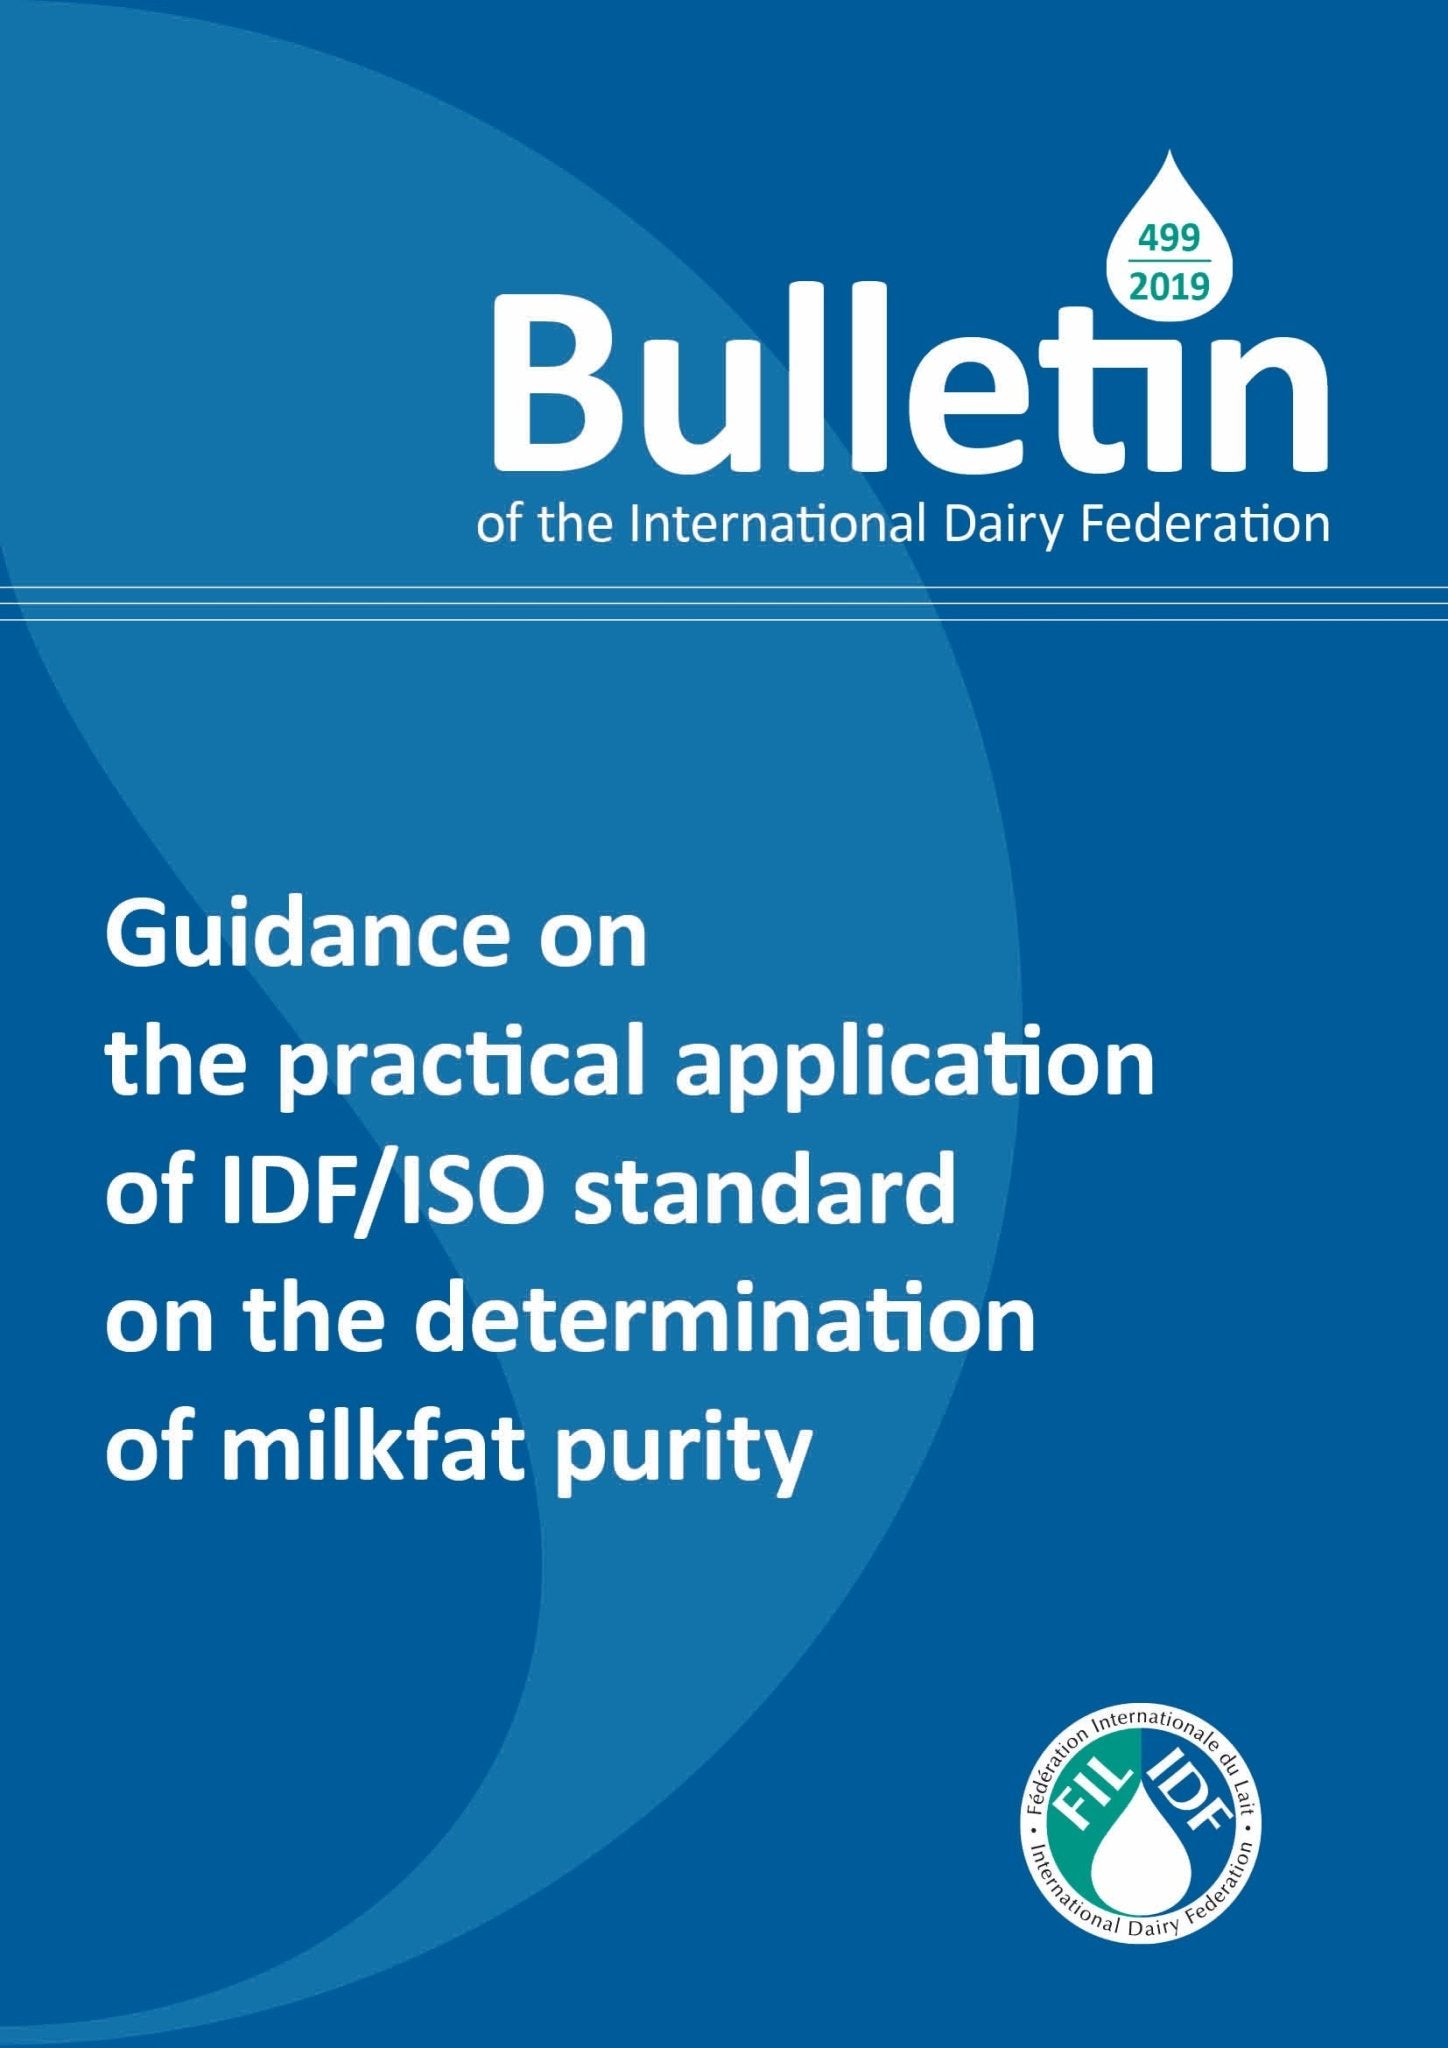 Bulletin of the IDF N° 499/ 2019: Guidance on the Practical Application of IDF | ISO Standard on the Determination of Milkfat Purity - FIL-IDF